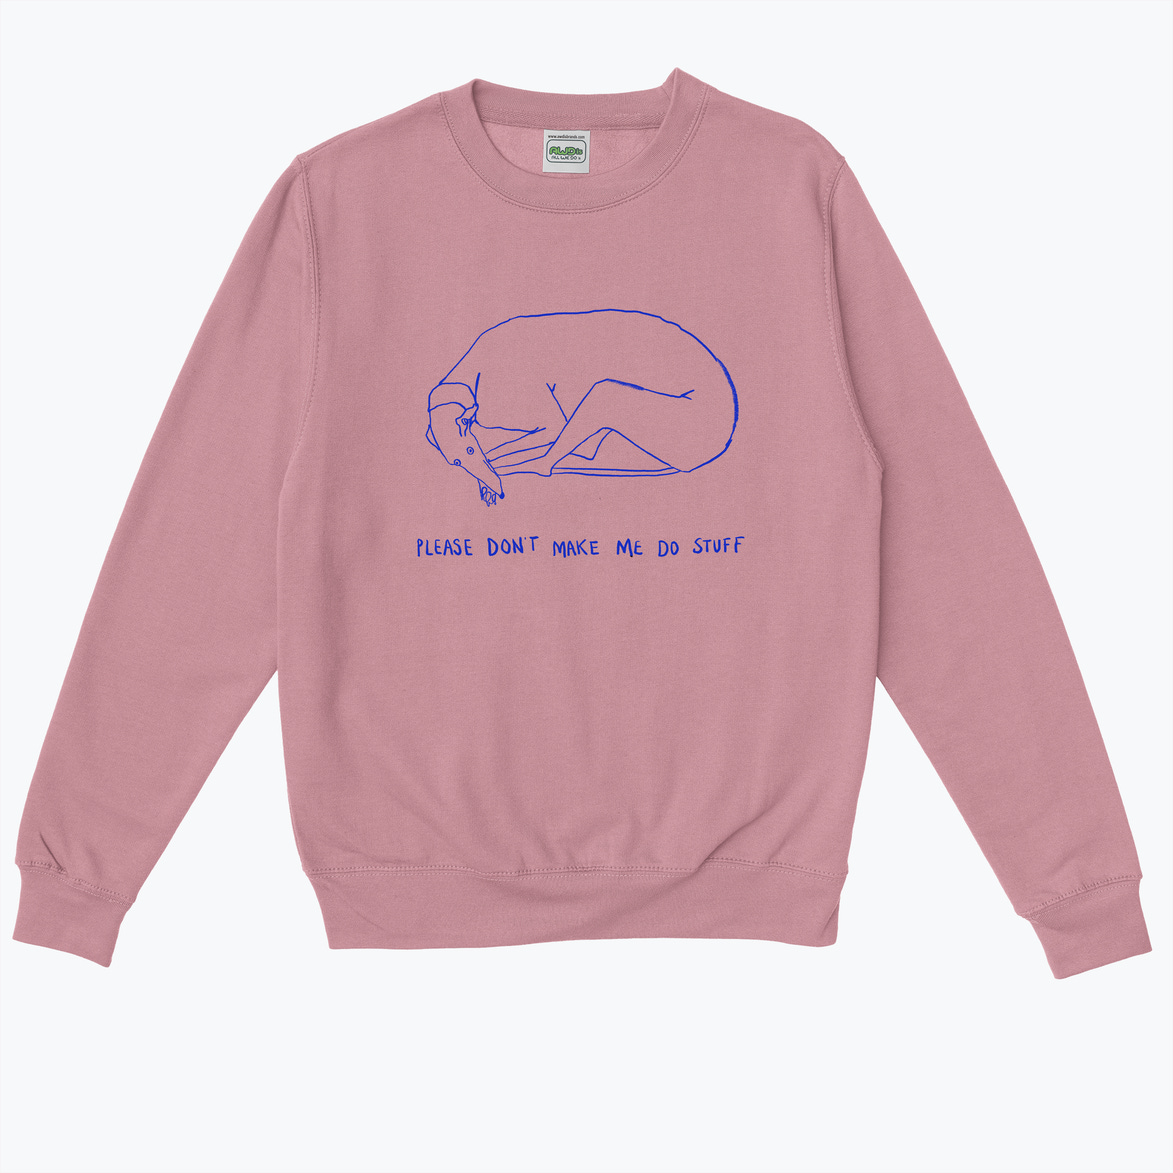 PLEASE DON't MAKE ME DO STUFF - Front of Basic Relaxed Sweatshirt in Dusty Pink